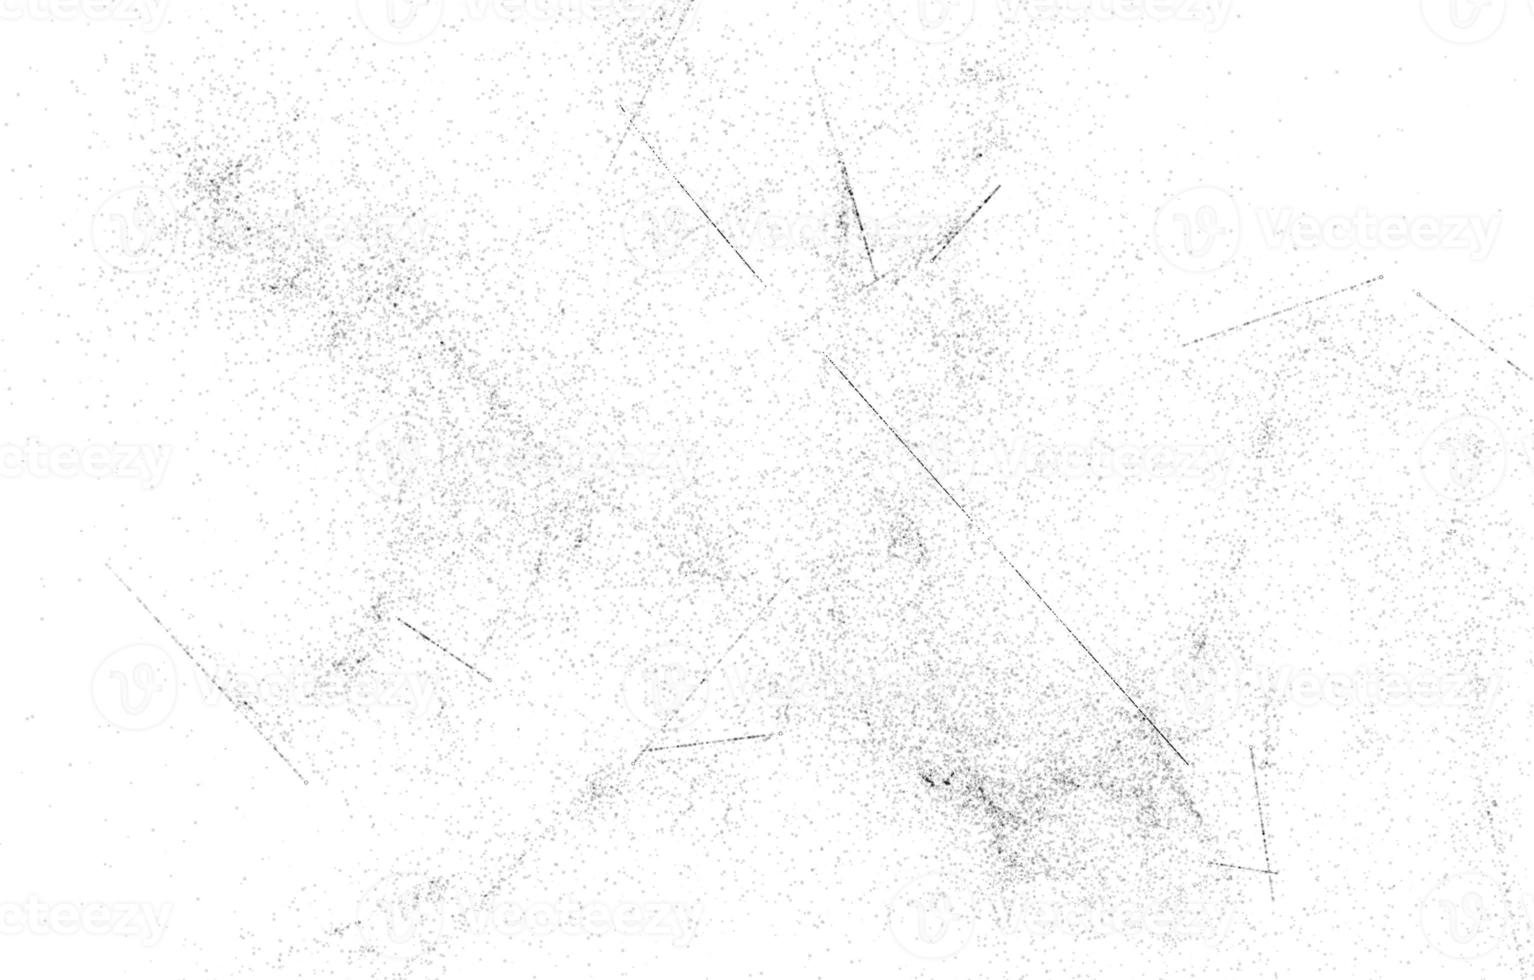 Dust and Scratched Textured Backgrounds.Grunge white and black wall background.Dark Messy Dust Overlay Distress Background. Easy To Create Abstract Dotted, Scratched photo